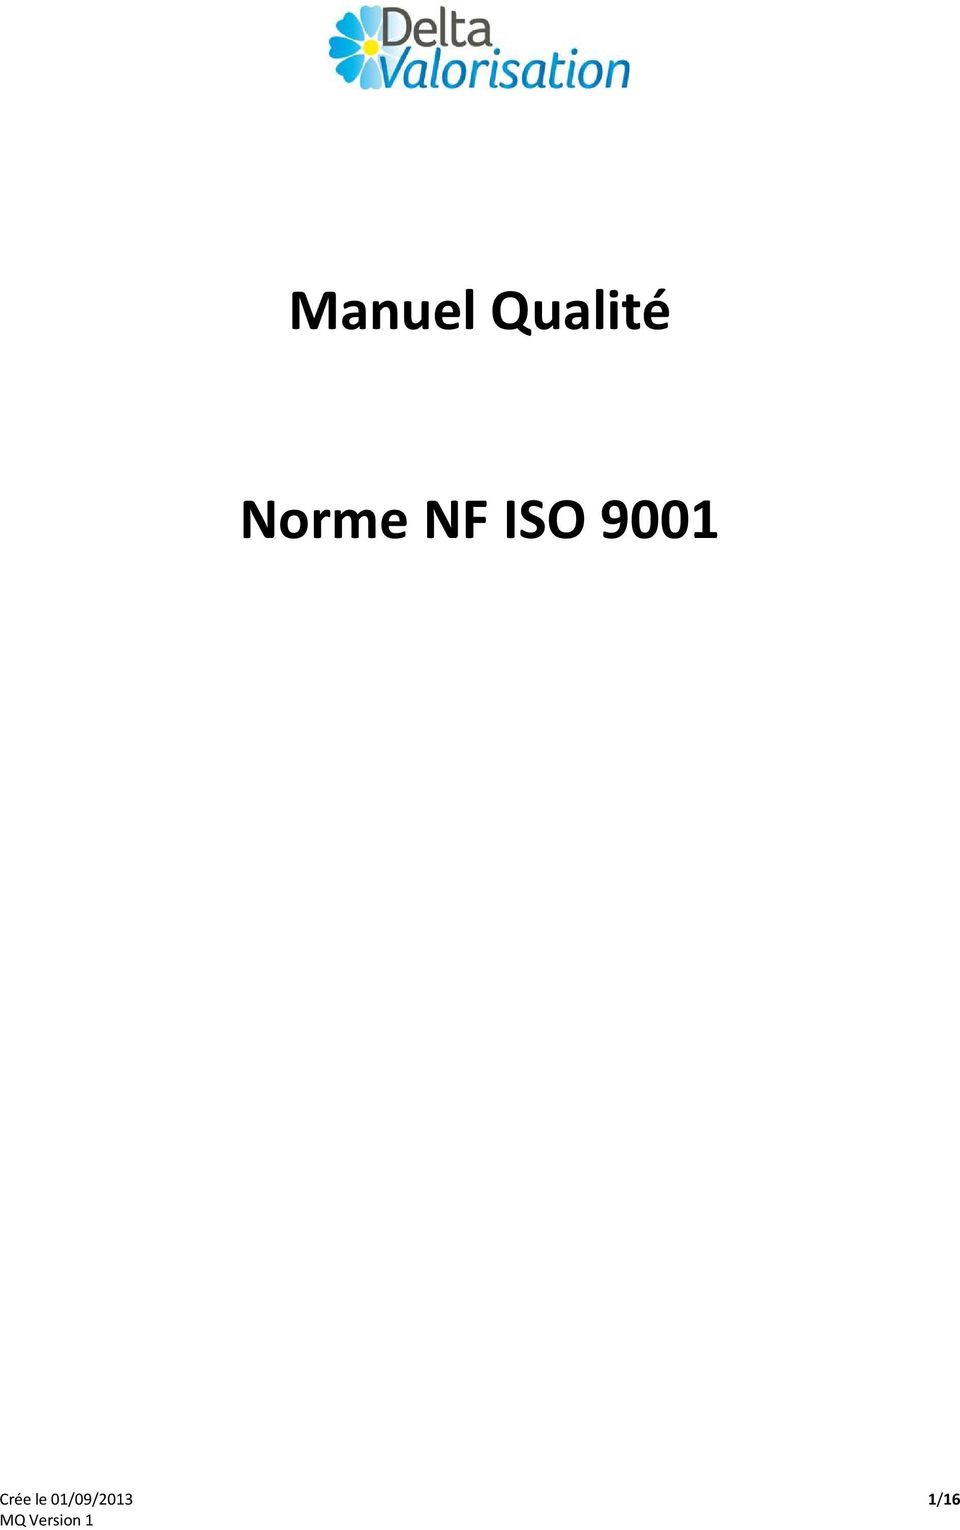 NF ISO 9001